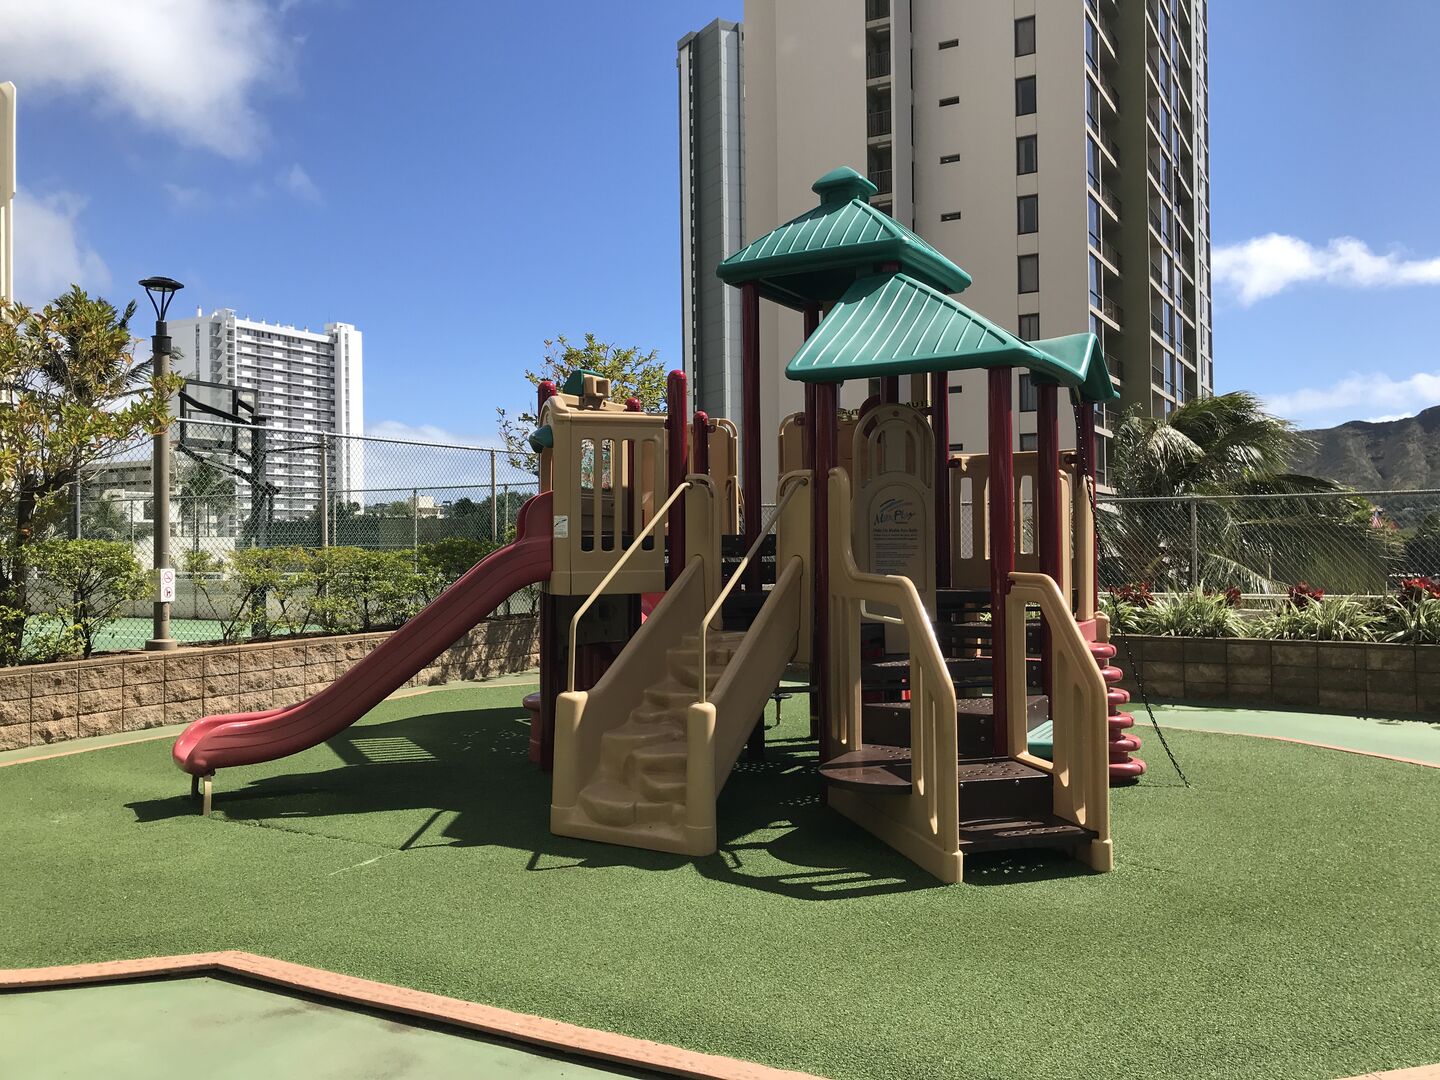 Children can play on the playground in the recreation deck.